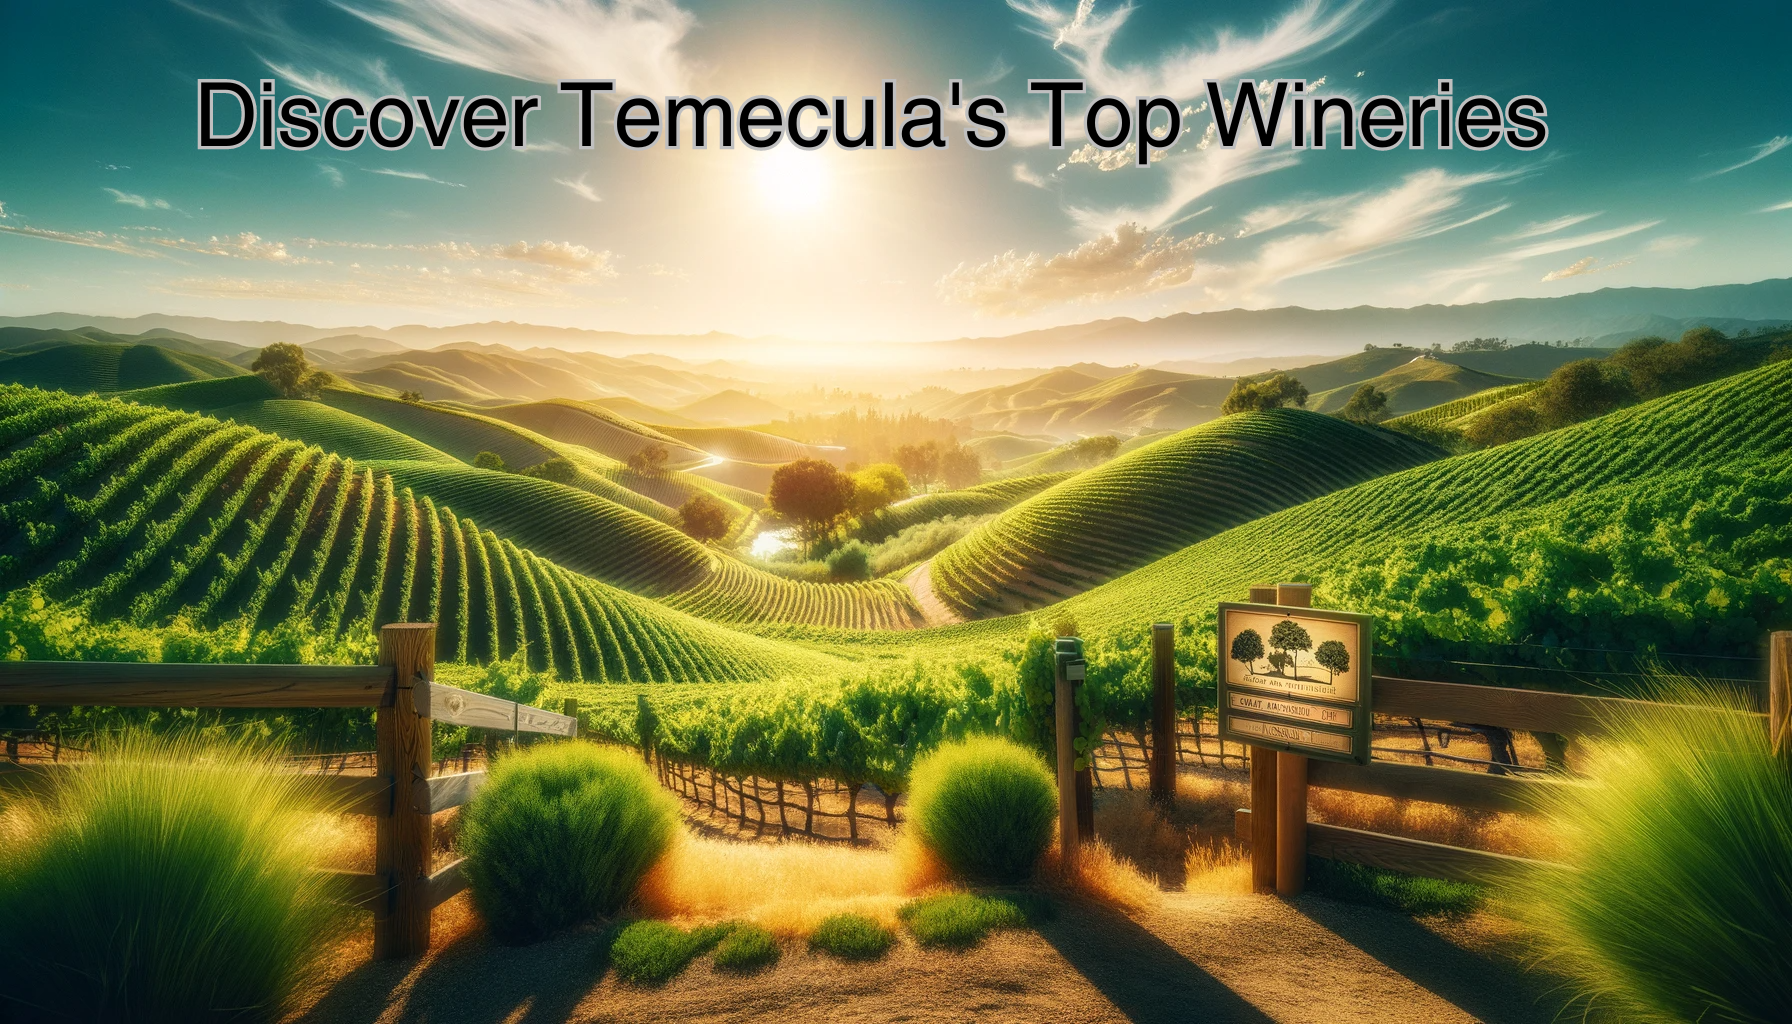 Discover Temecula's Top Wineries